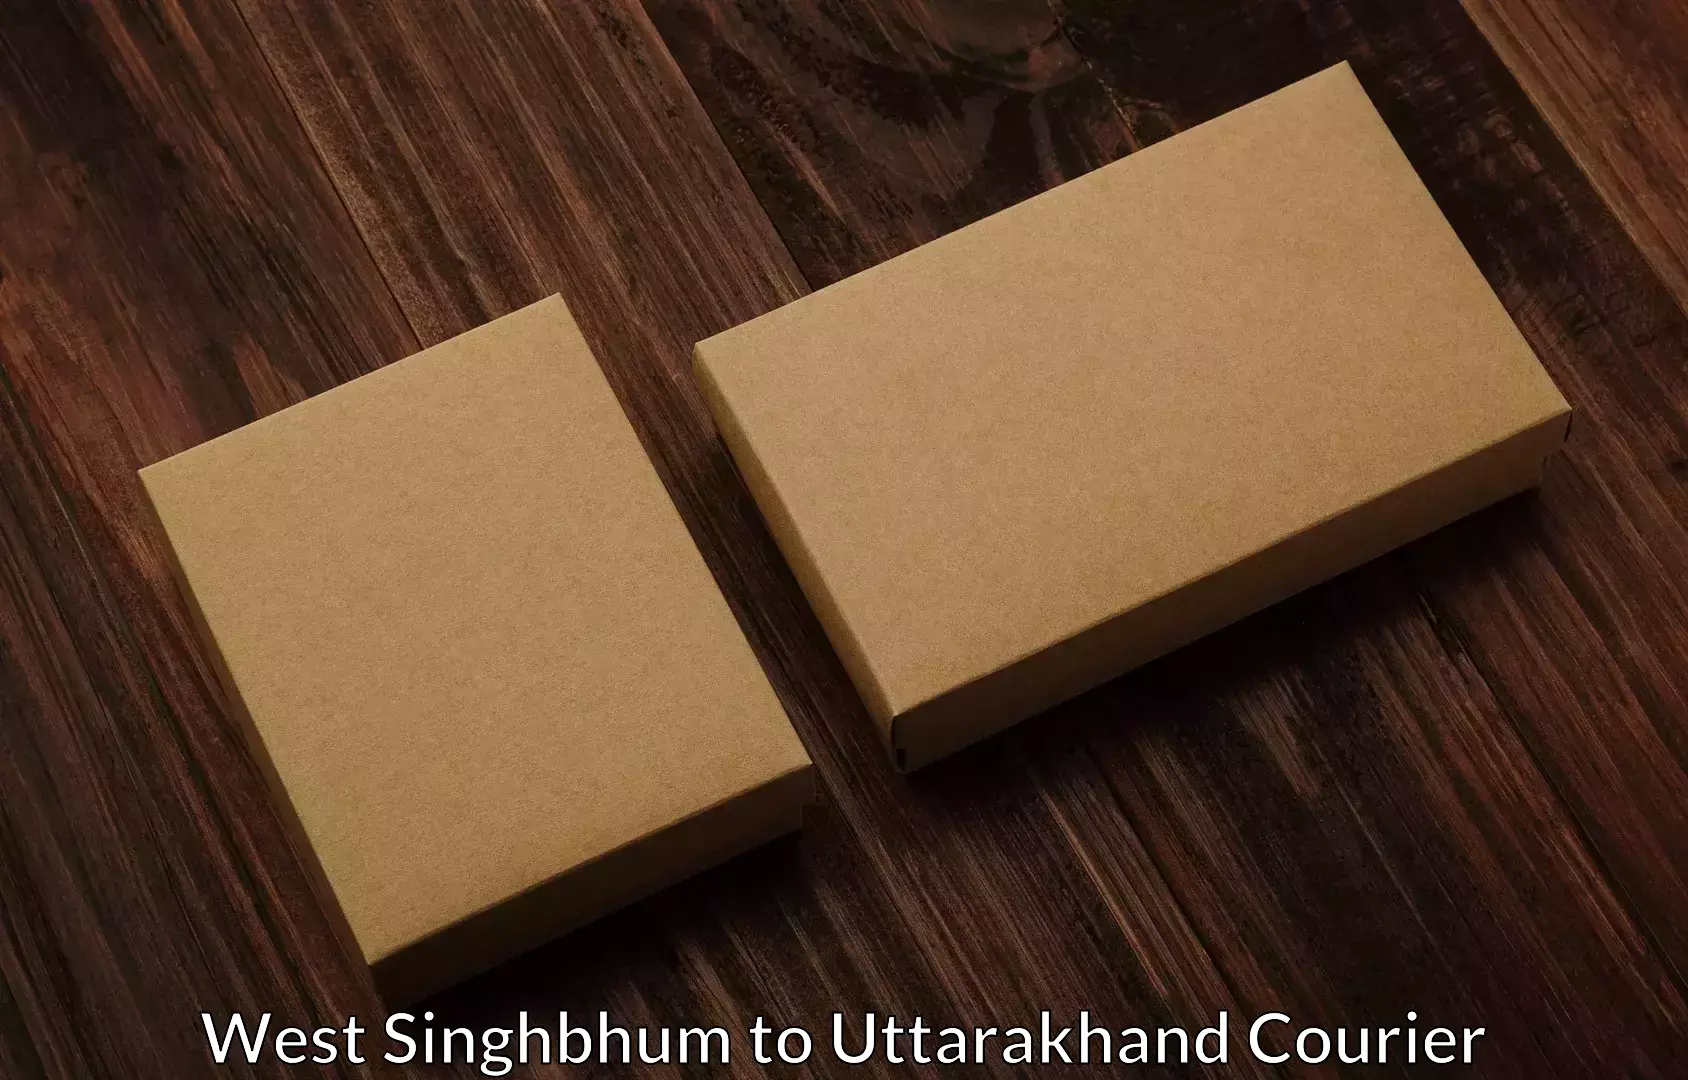 Specialized moving company in West Singhbhum to Uttarakhand